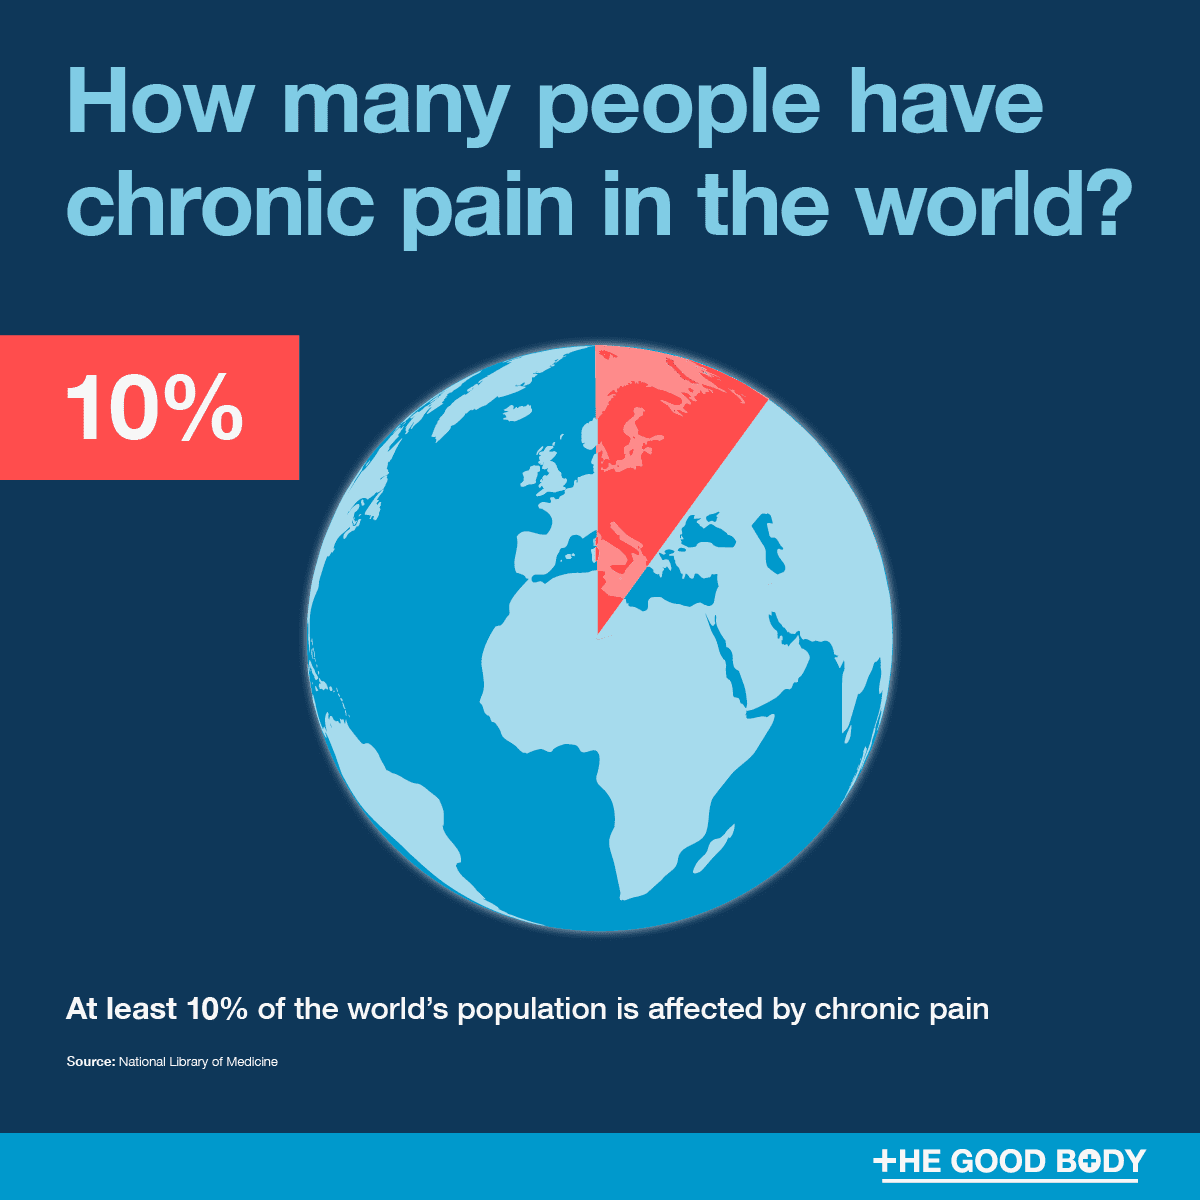 Infographic: At least 10% of the world’s population is affected by chronic pain